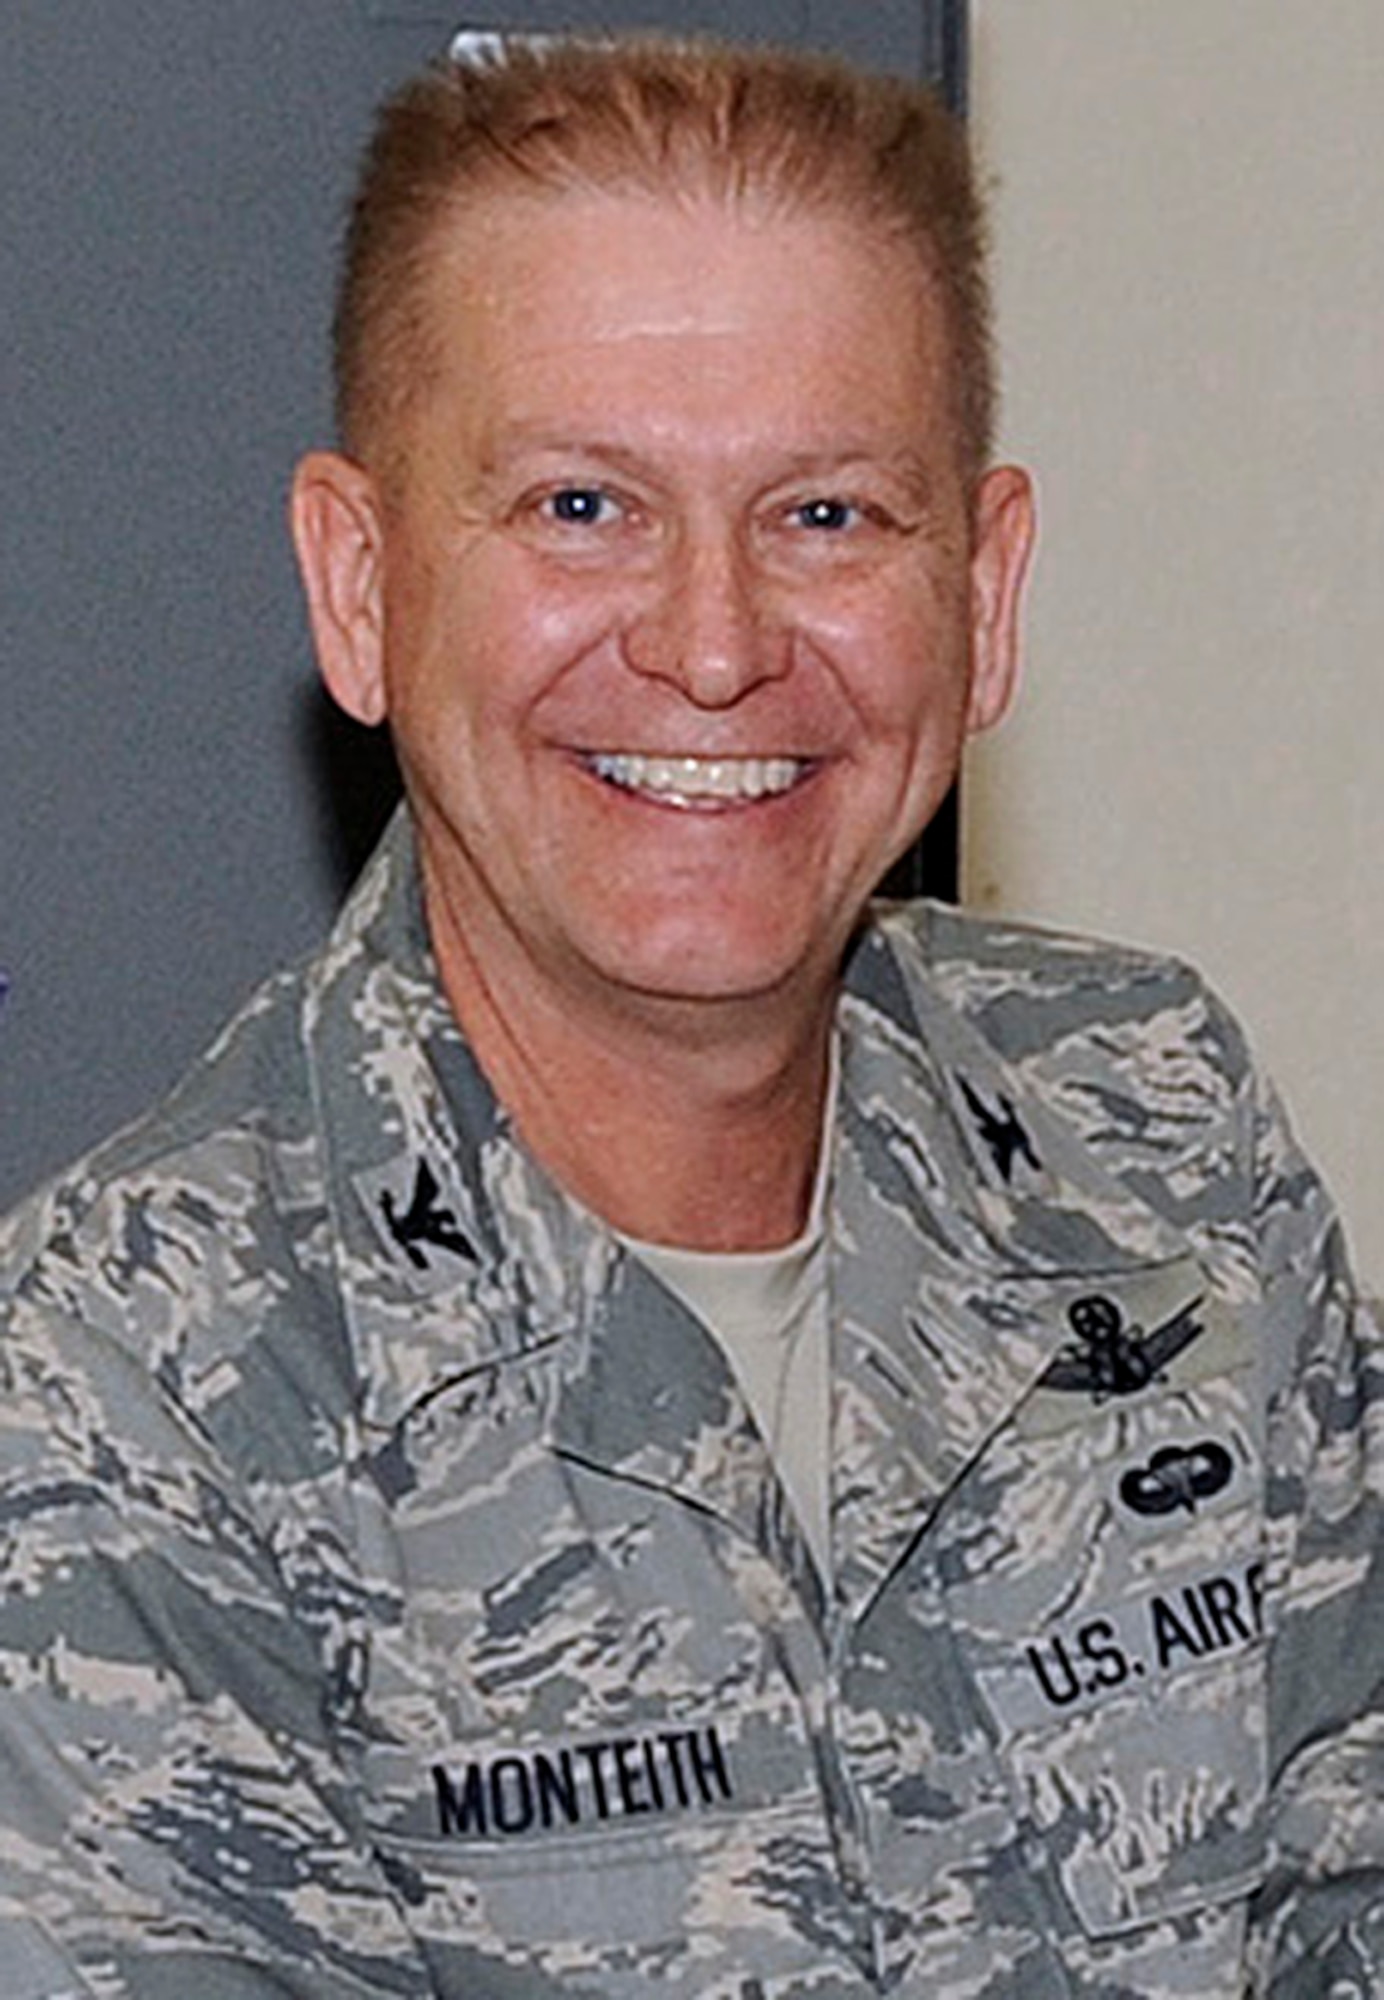 SCHRIEVER AIR FORCE BASE, Colo. -- Col. Wayne Monteith, 50th Space Wing commander. (U.S. Air Force photo) 